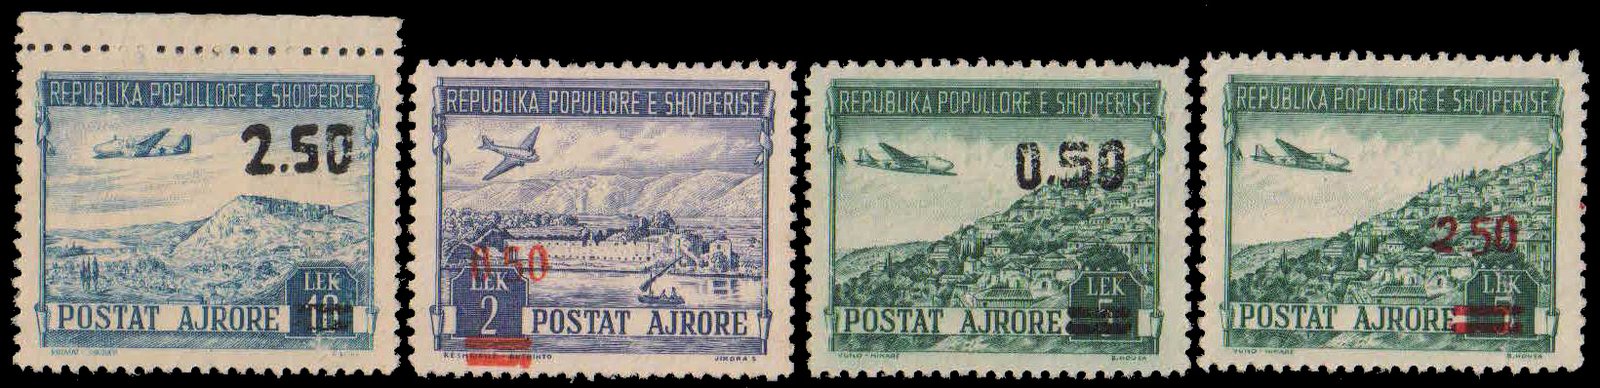 ALBANIA 1952-Aeroplane, Vuno Himare, Surcharged Issue, Set of 4, Mint Gum Wash, S.G. 571-74-Cat � 735